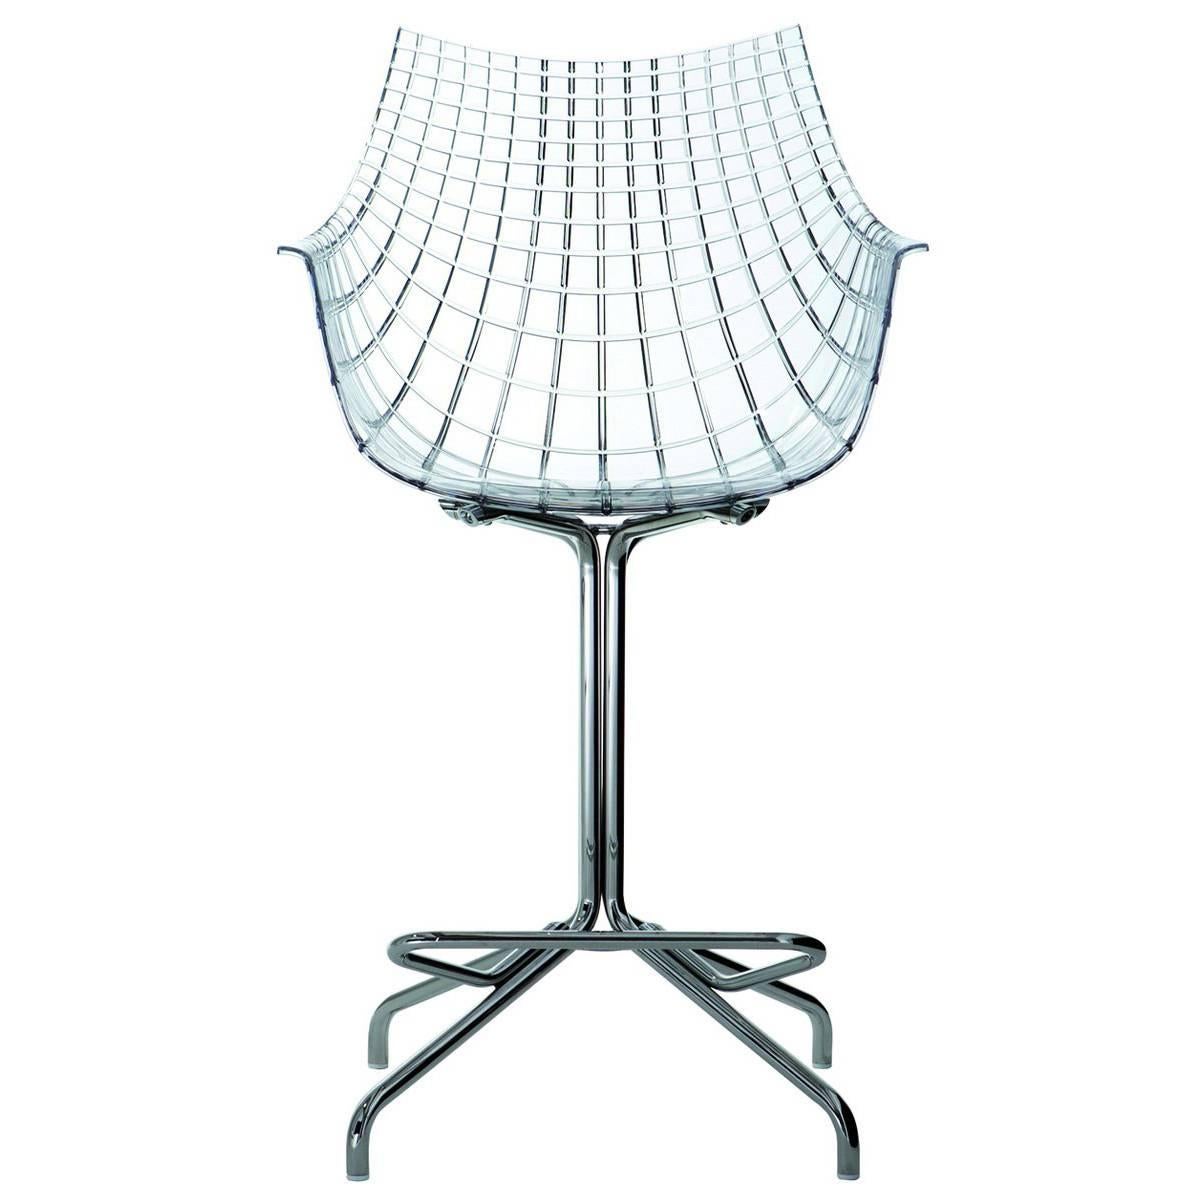 "Meridiana" Polycarbonate and Steel Swivel High Stool by C. Pillet for Driade